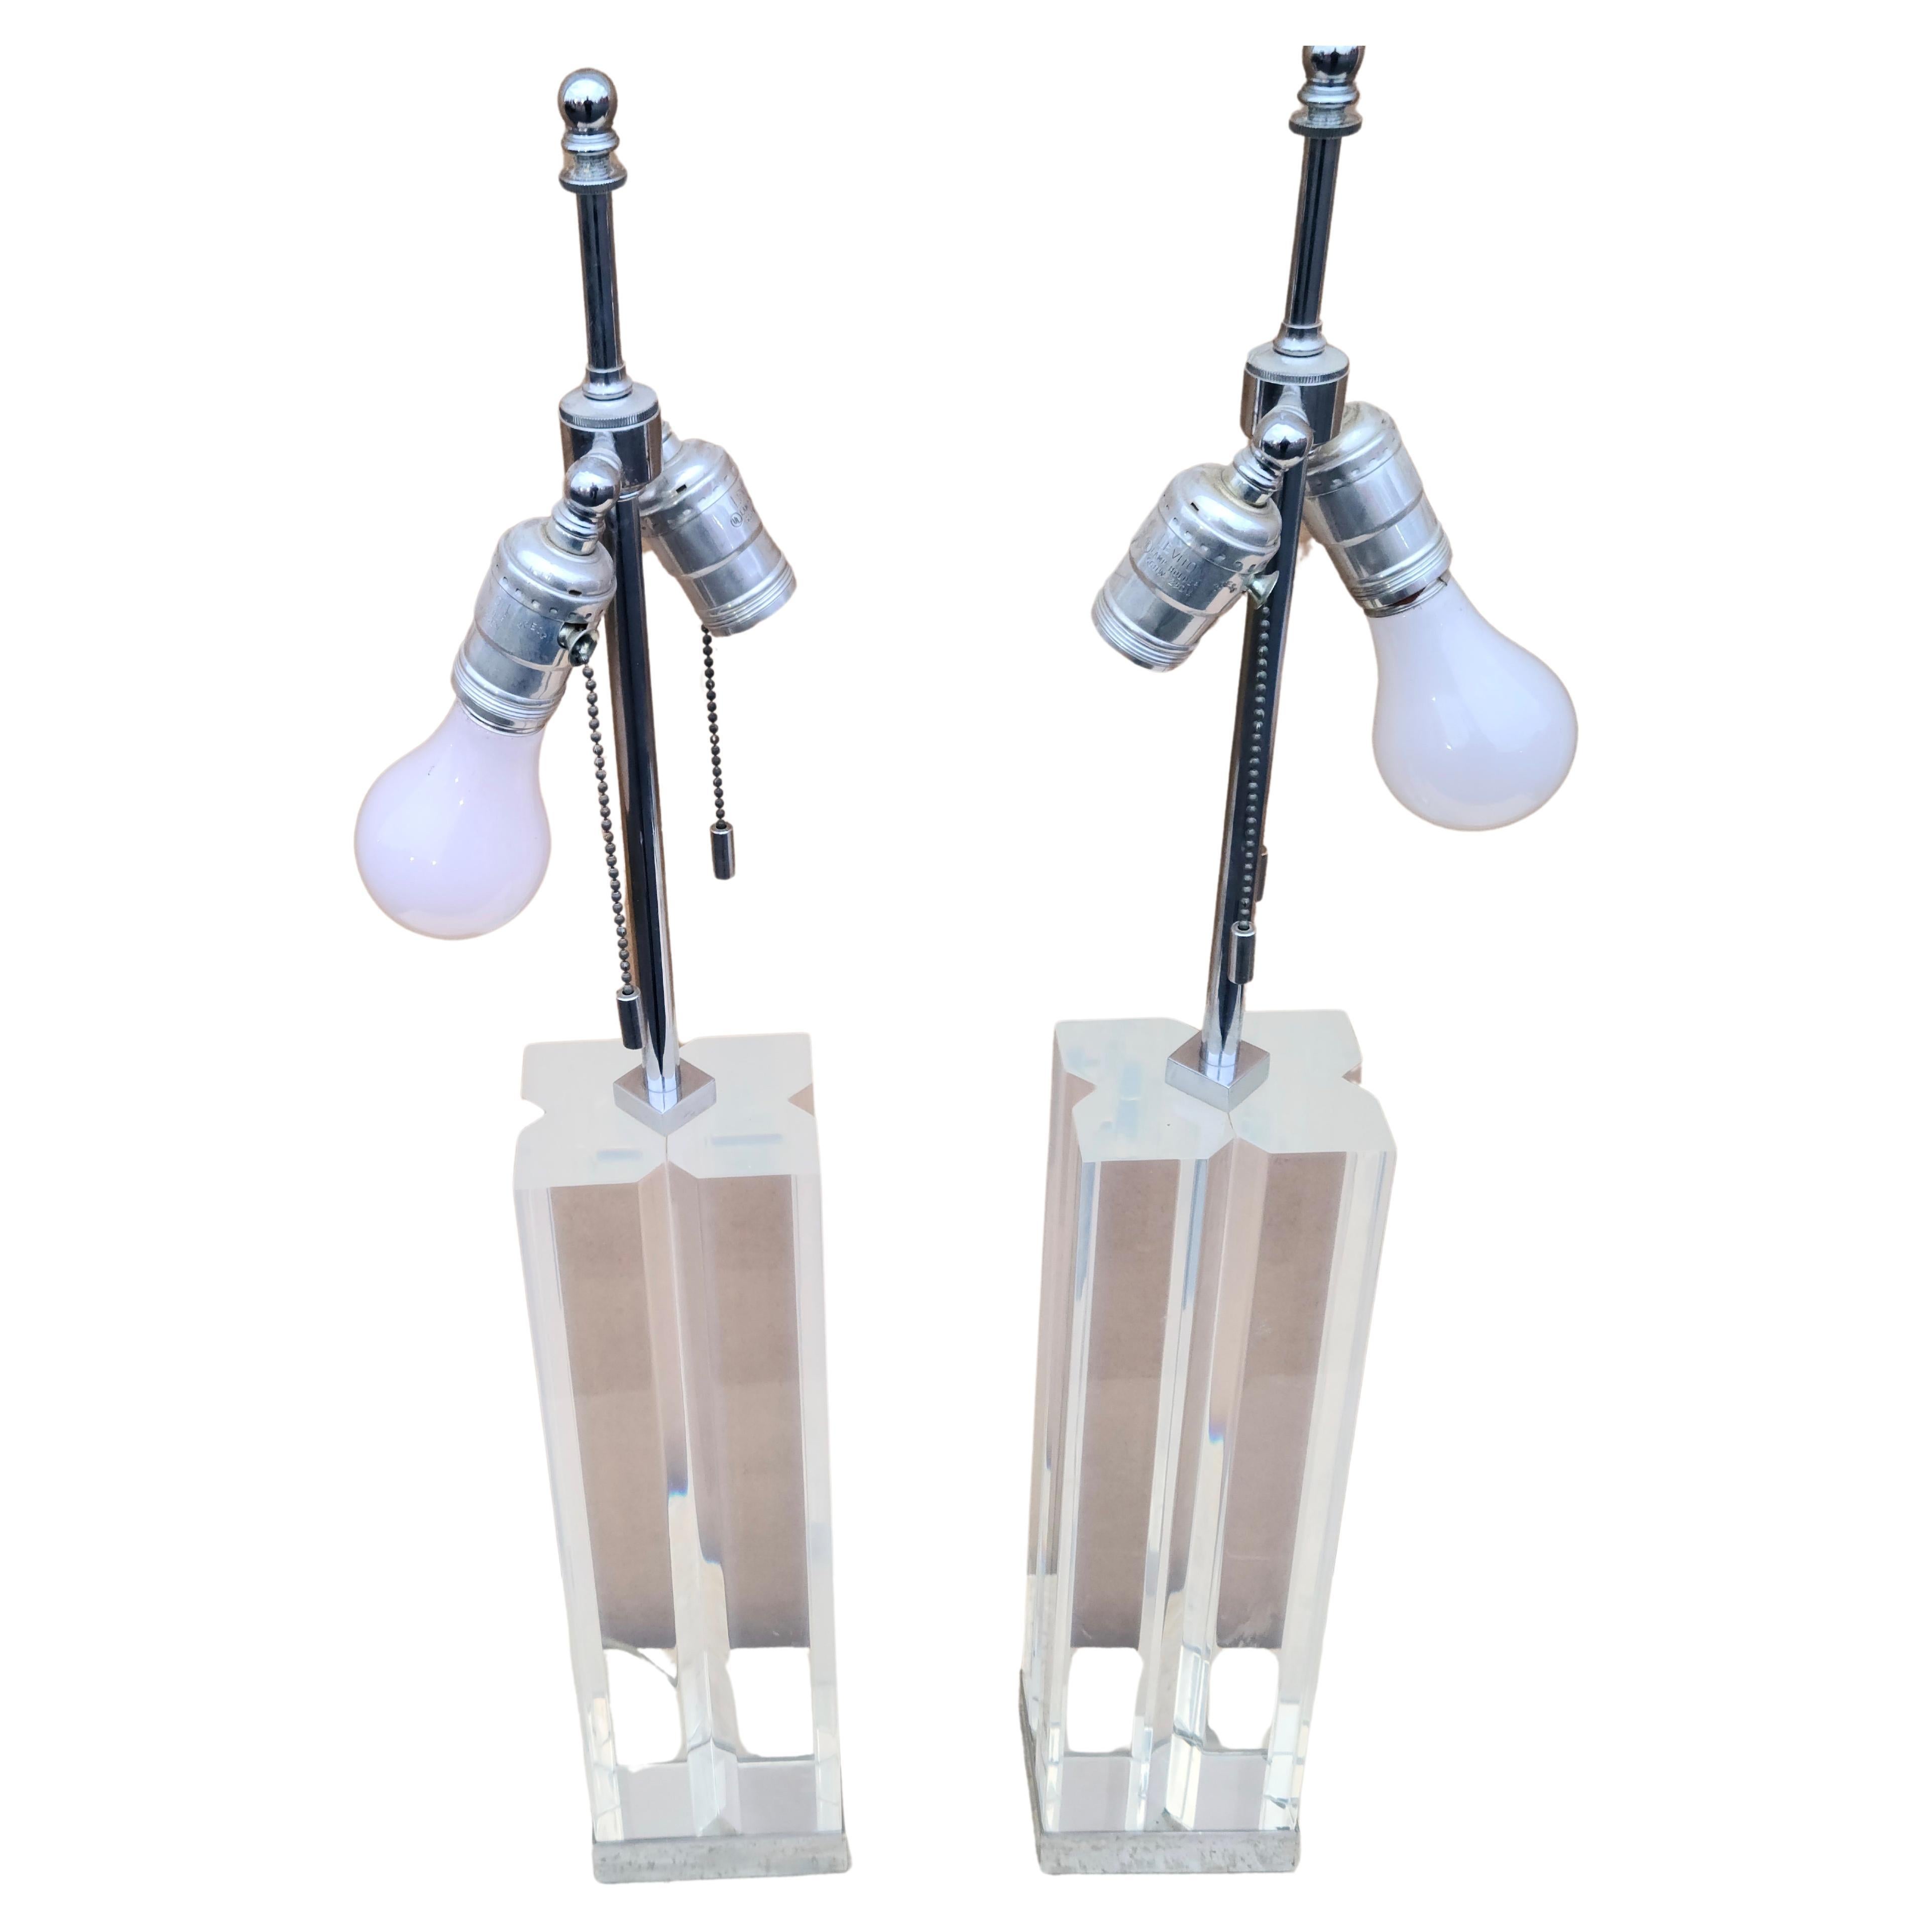 Pair Lucite and Chrome Lamps signed Hansen New York.

Designed by Karl Springer.

Lucite and Chrome construction.